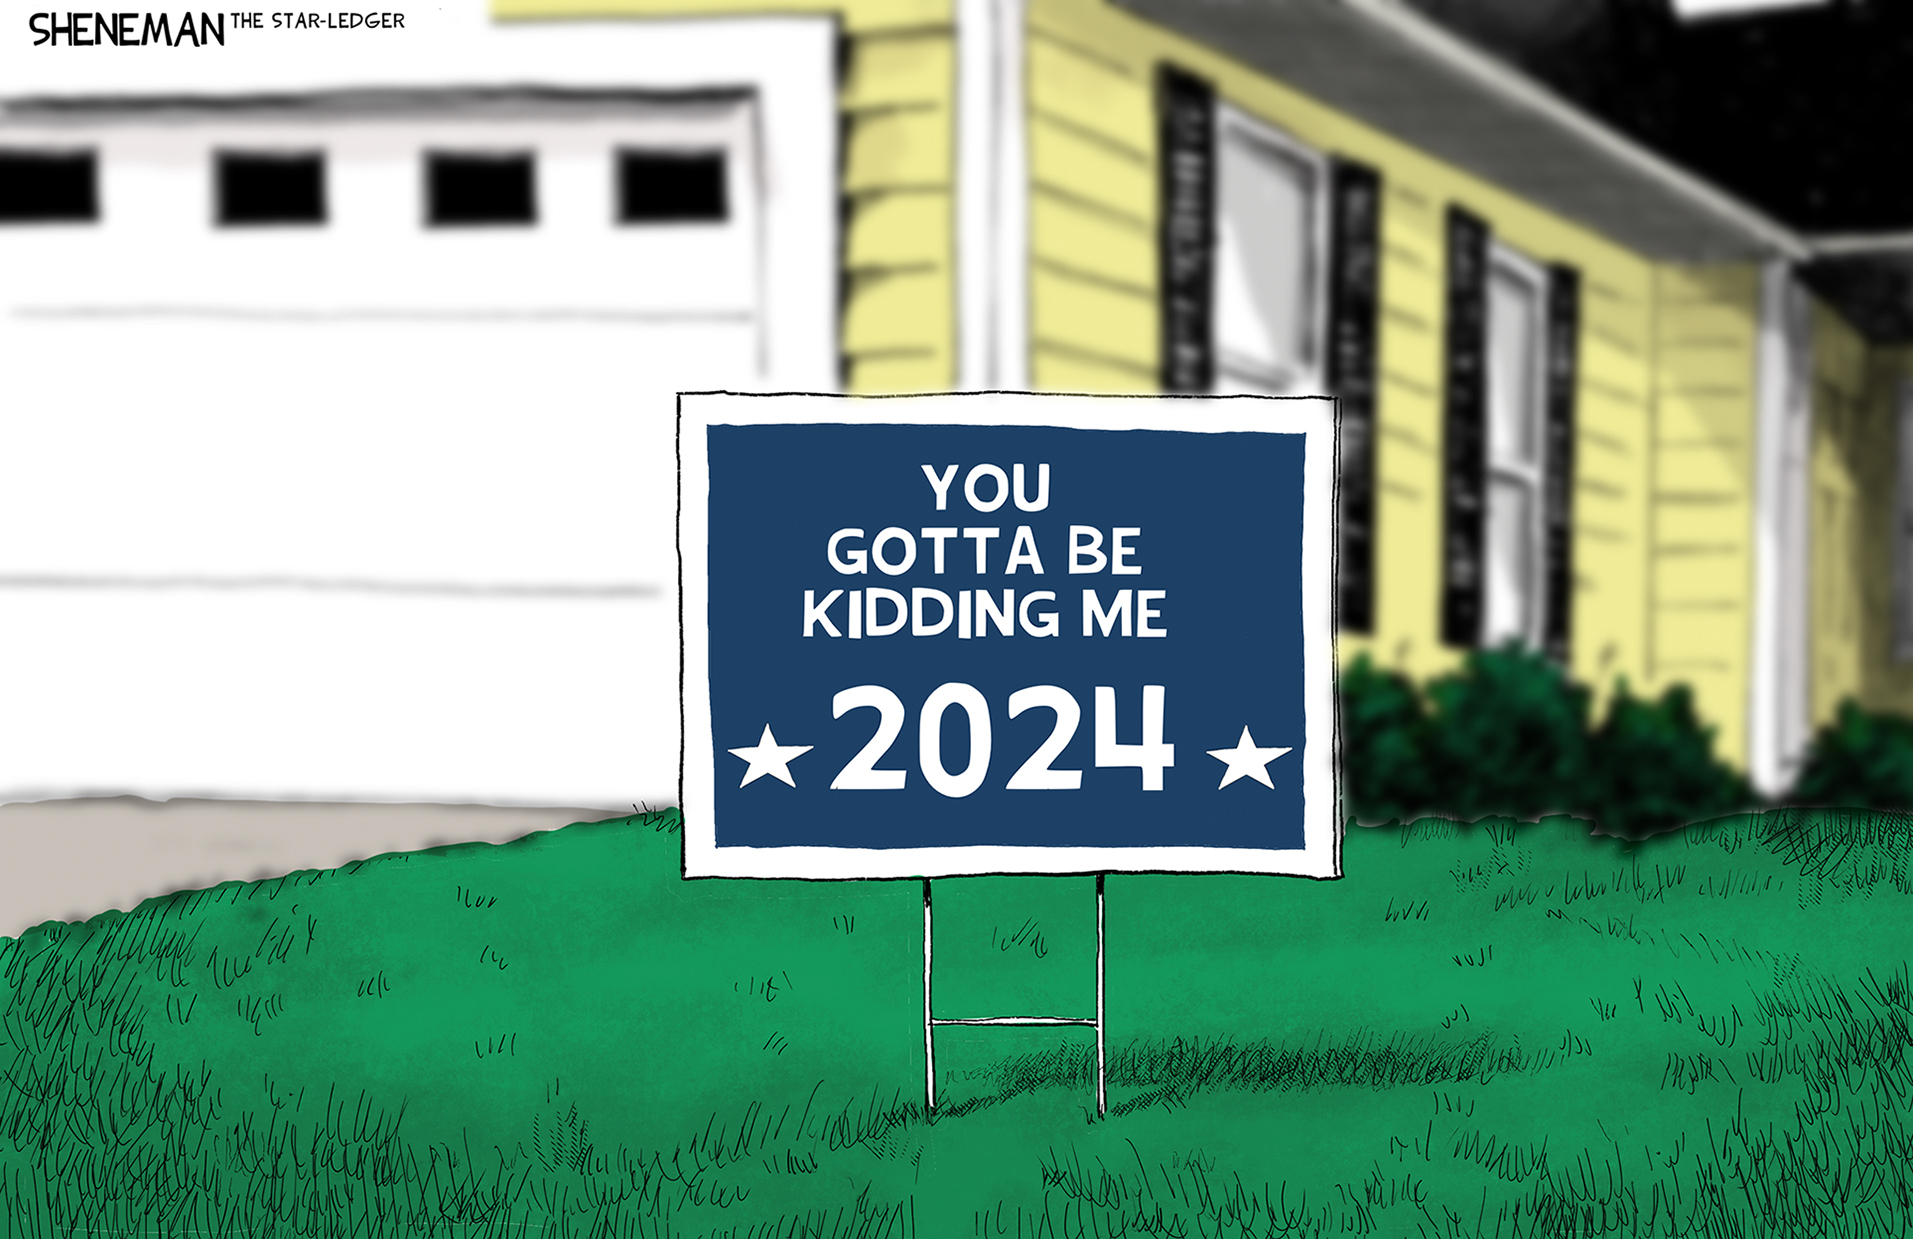  Today's political cartoons - July 3, 2024 